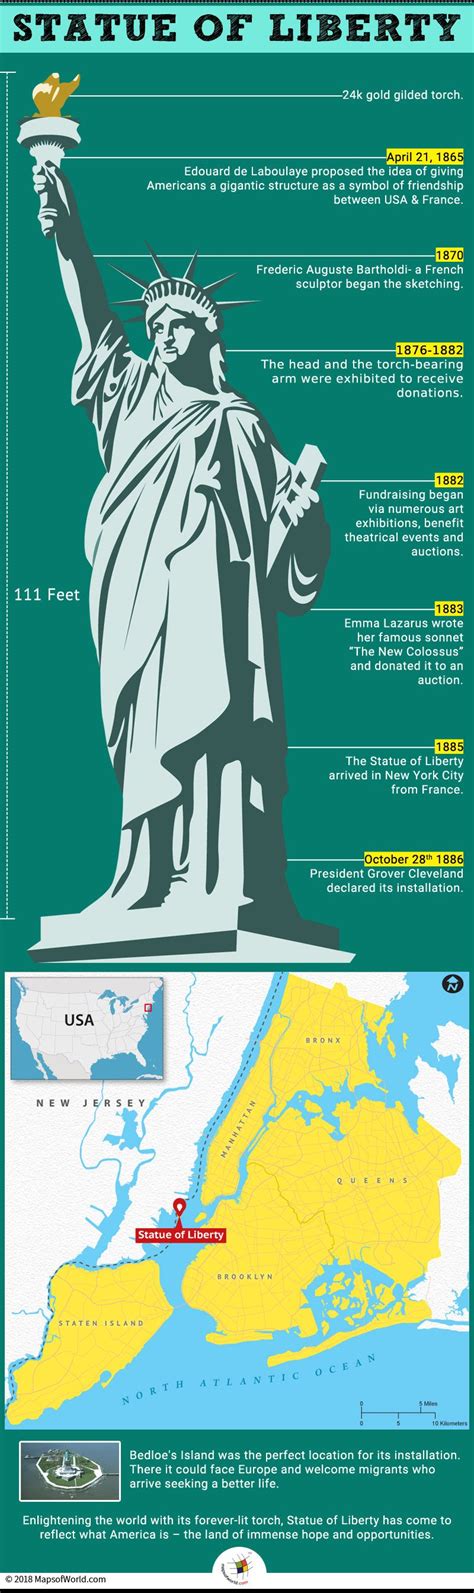 What Is The History Behind The Statue Of Liberty Answers Statue Of